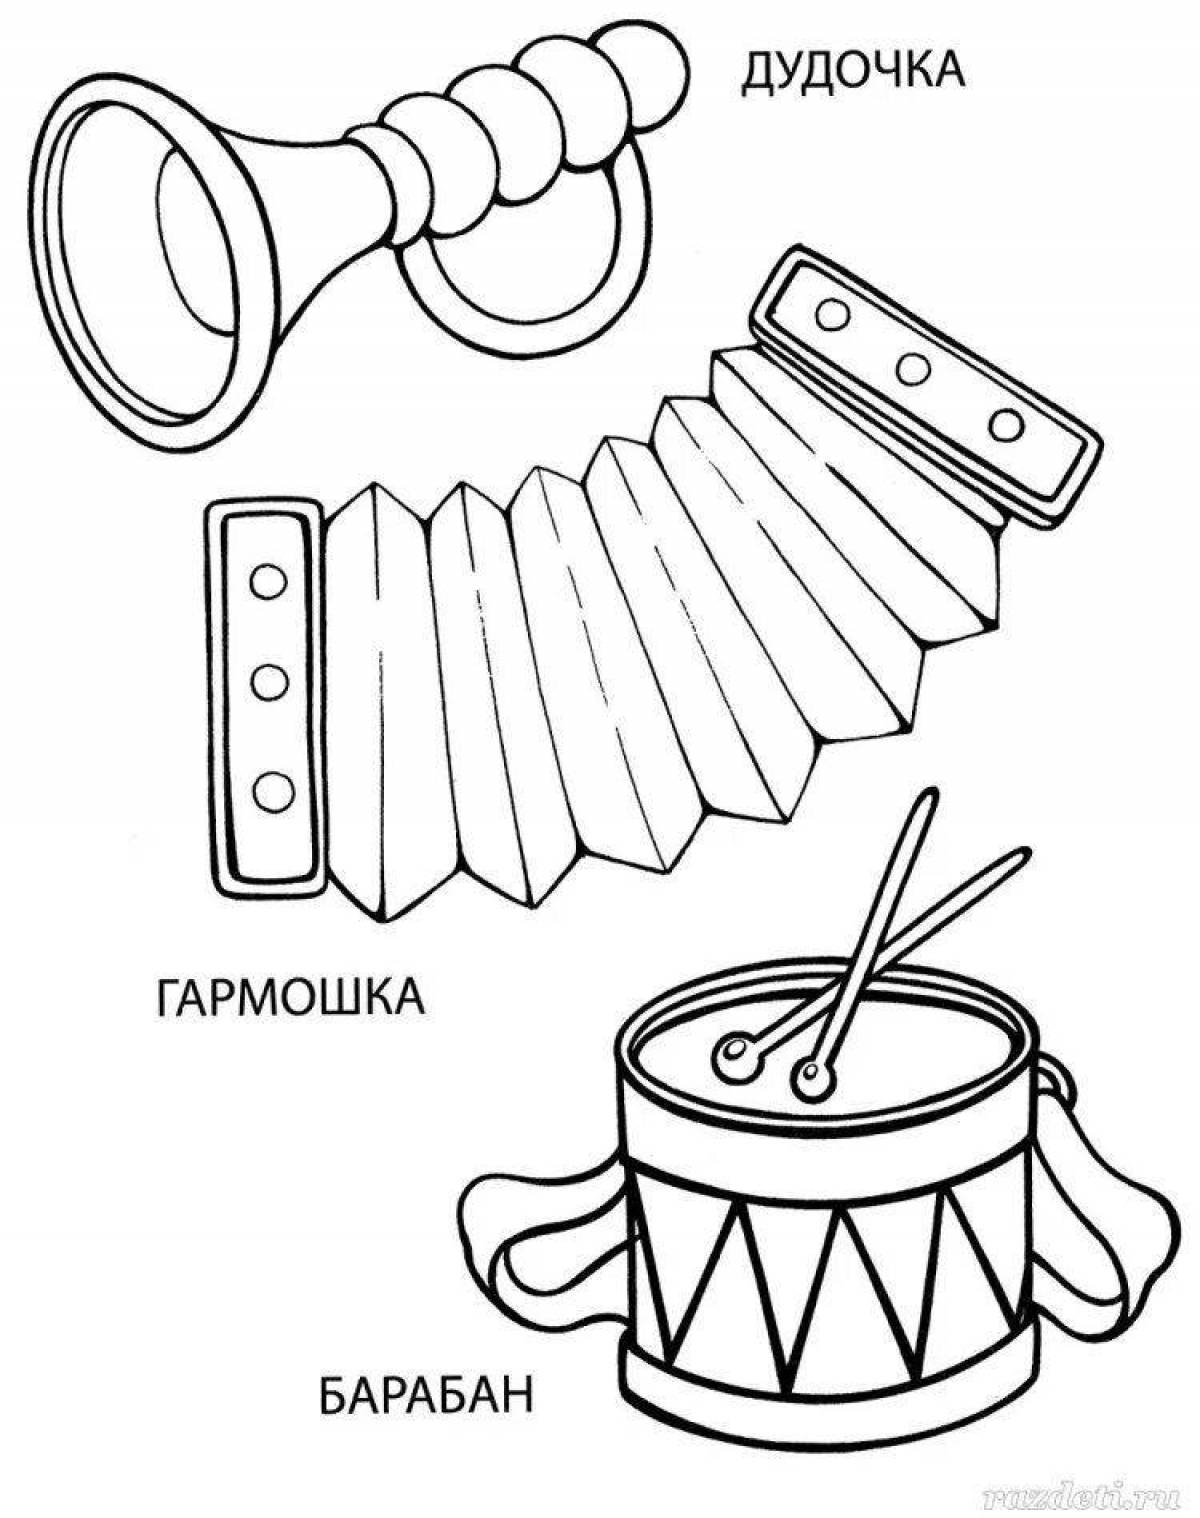 Coloring page unique Russian folk musical instruments